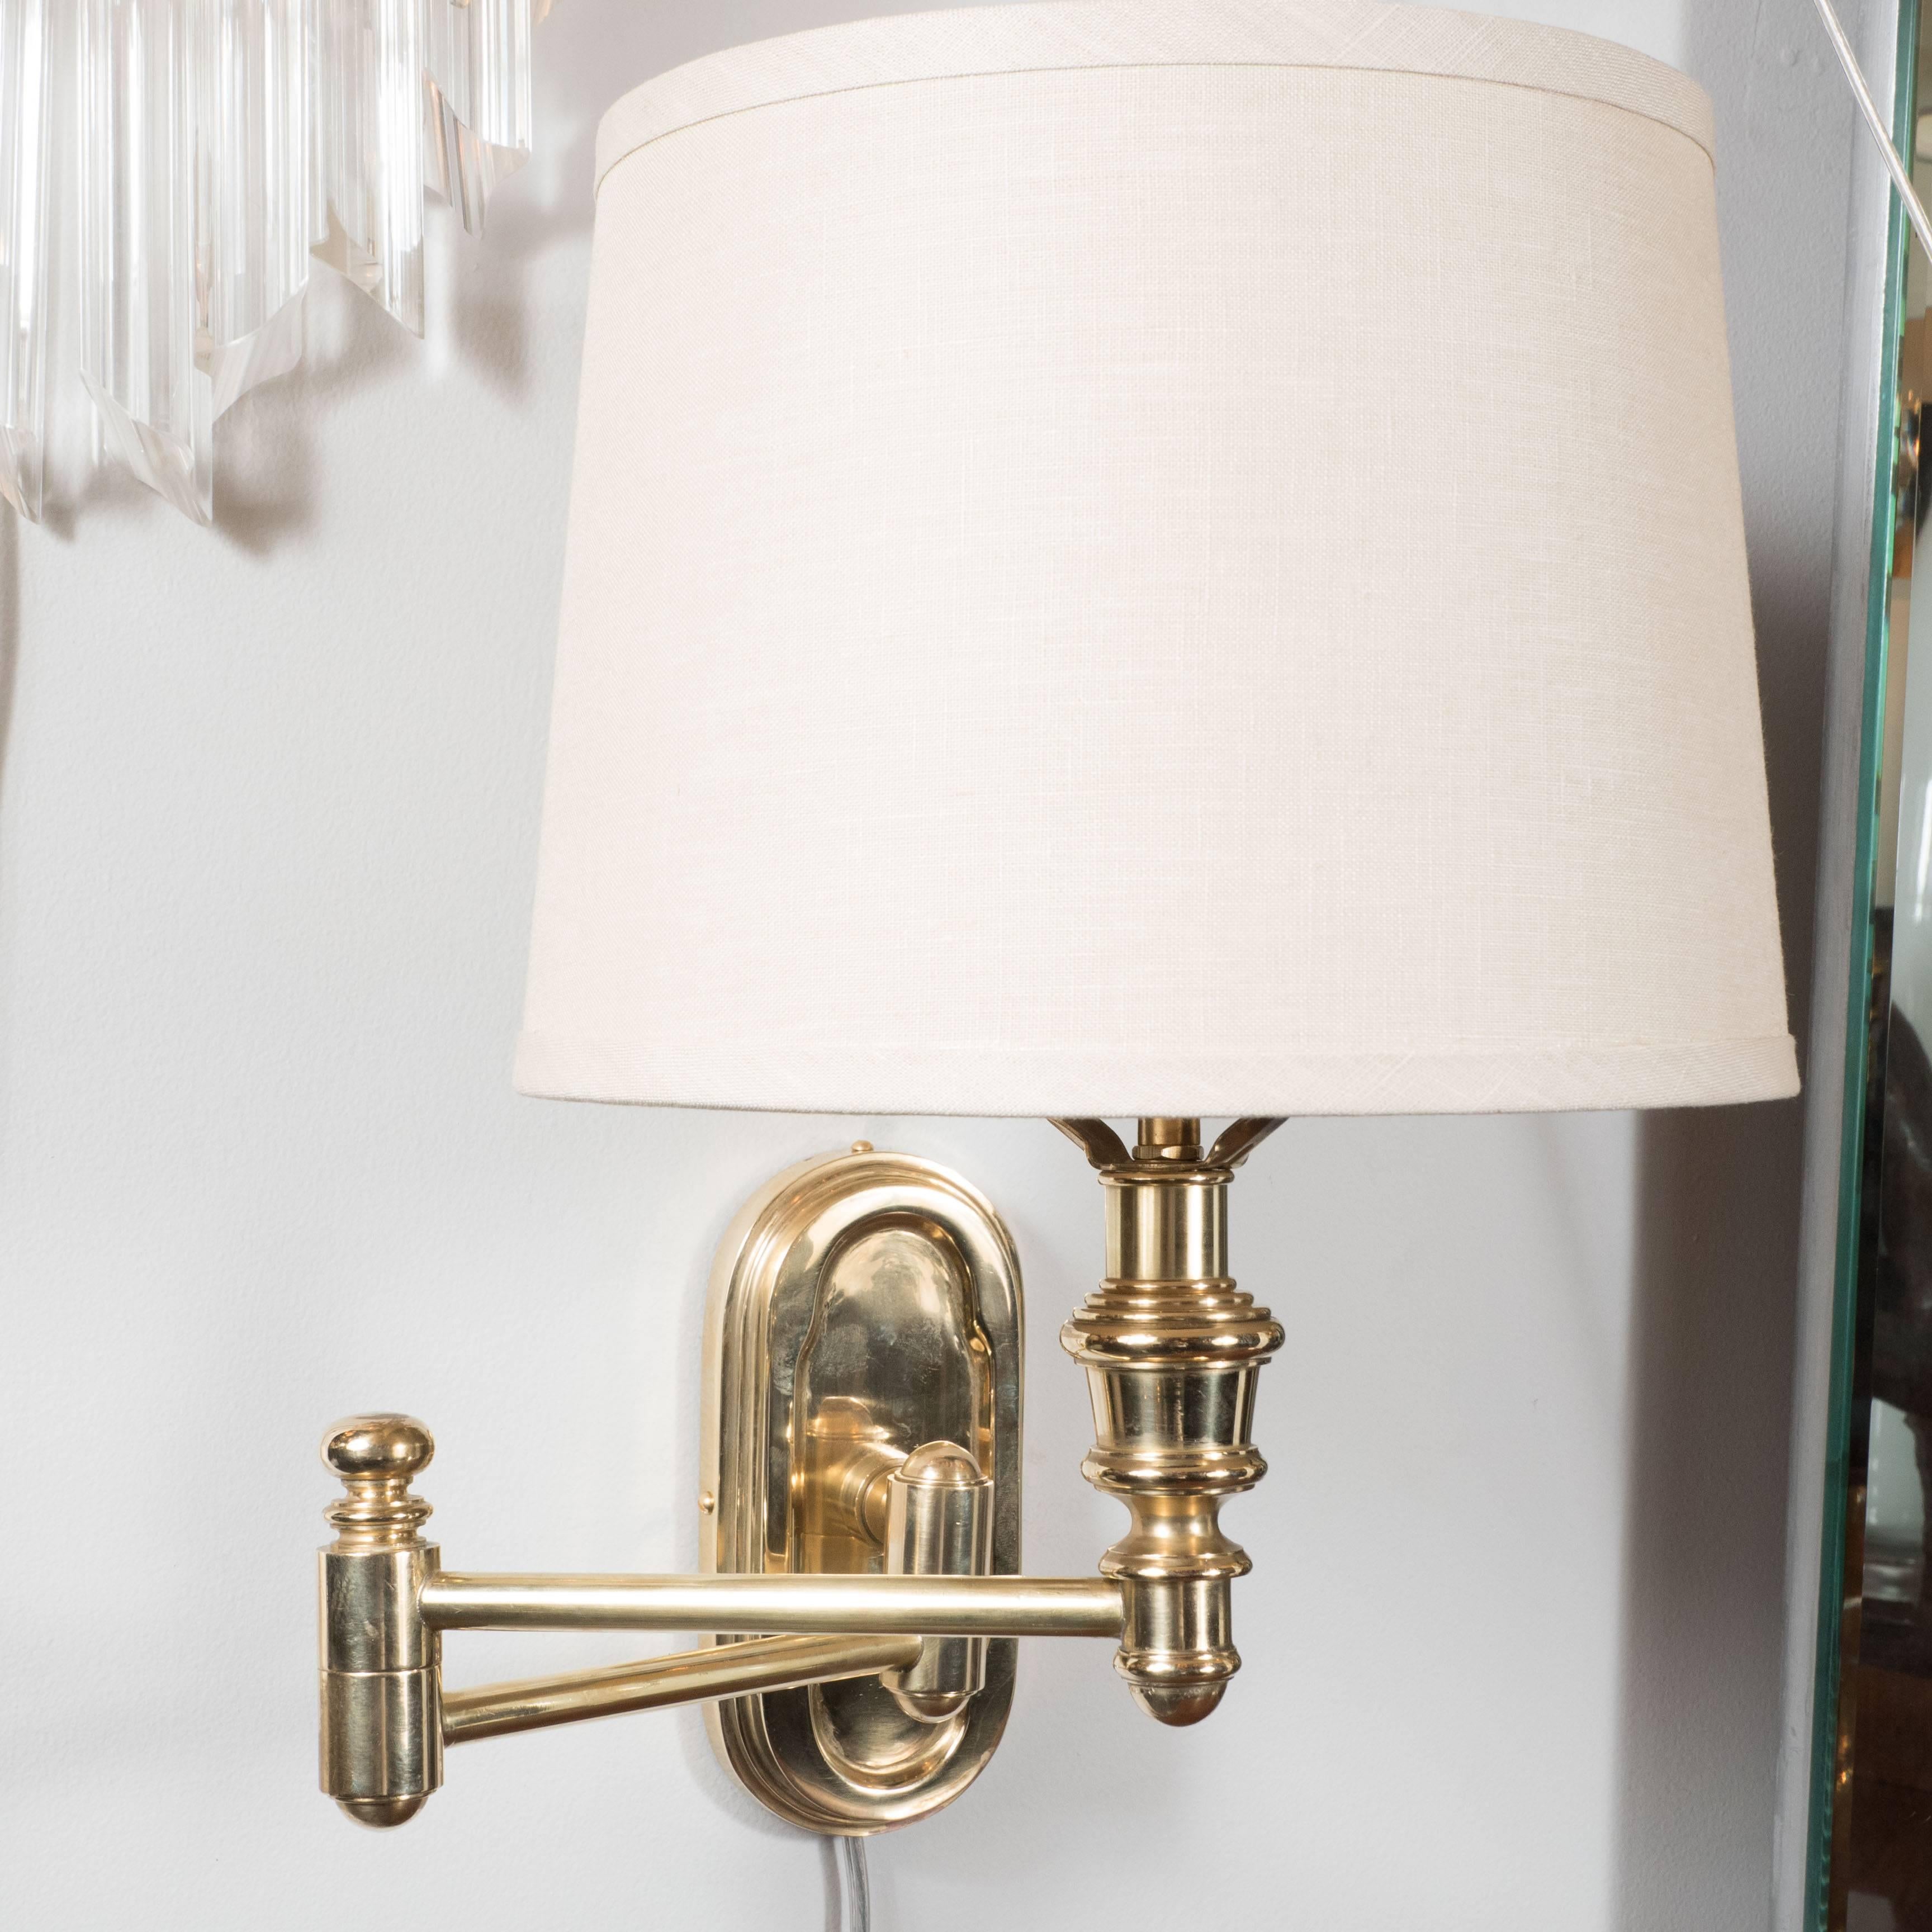 These very elegant swing arm sconces feature an oval back plate all made of solid high quality brass. They also feature a custom off-white linen shade with original brass finial. The arm extends generously to provide fa variety of positions. They